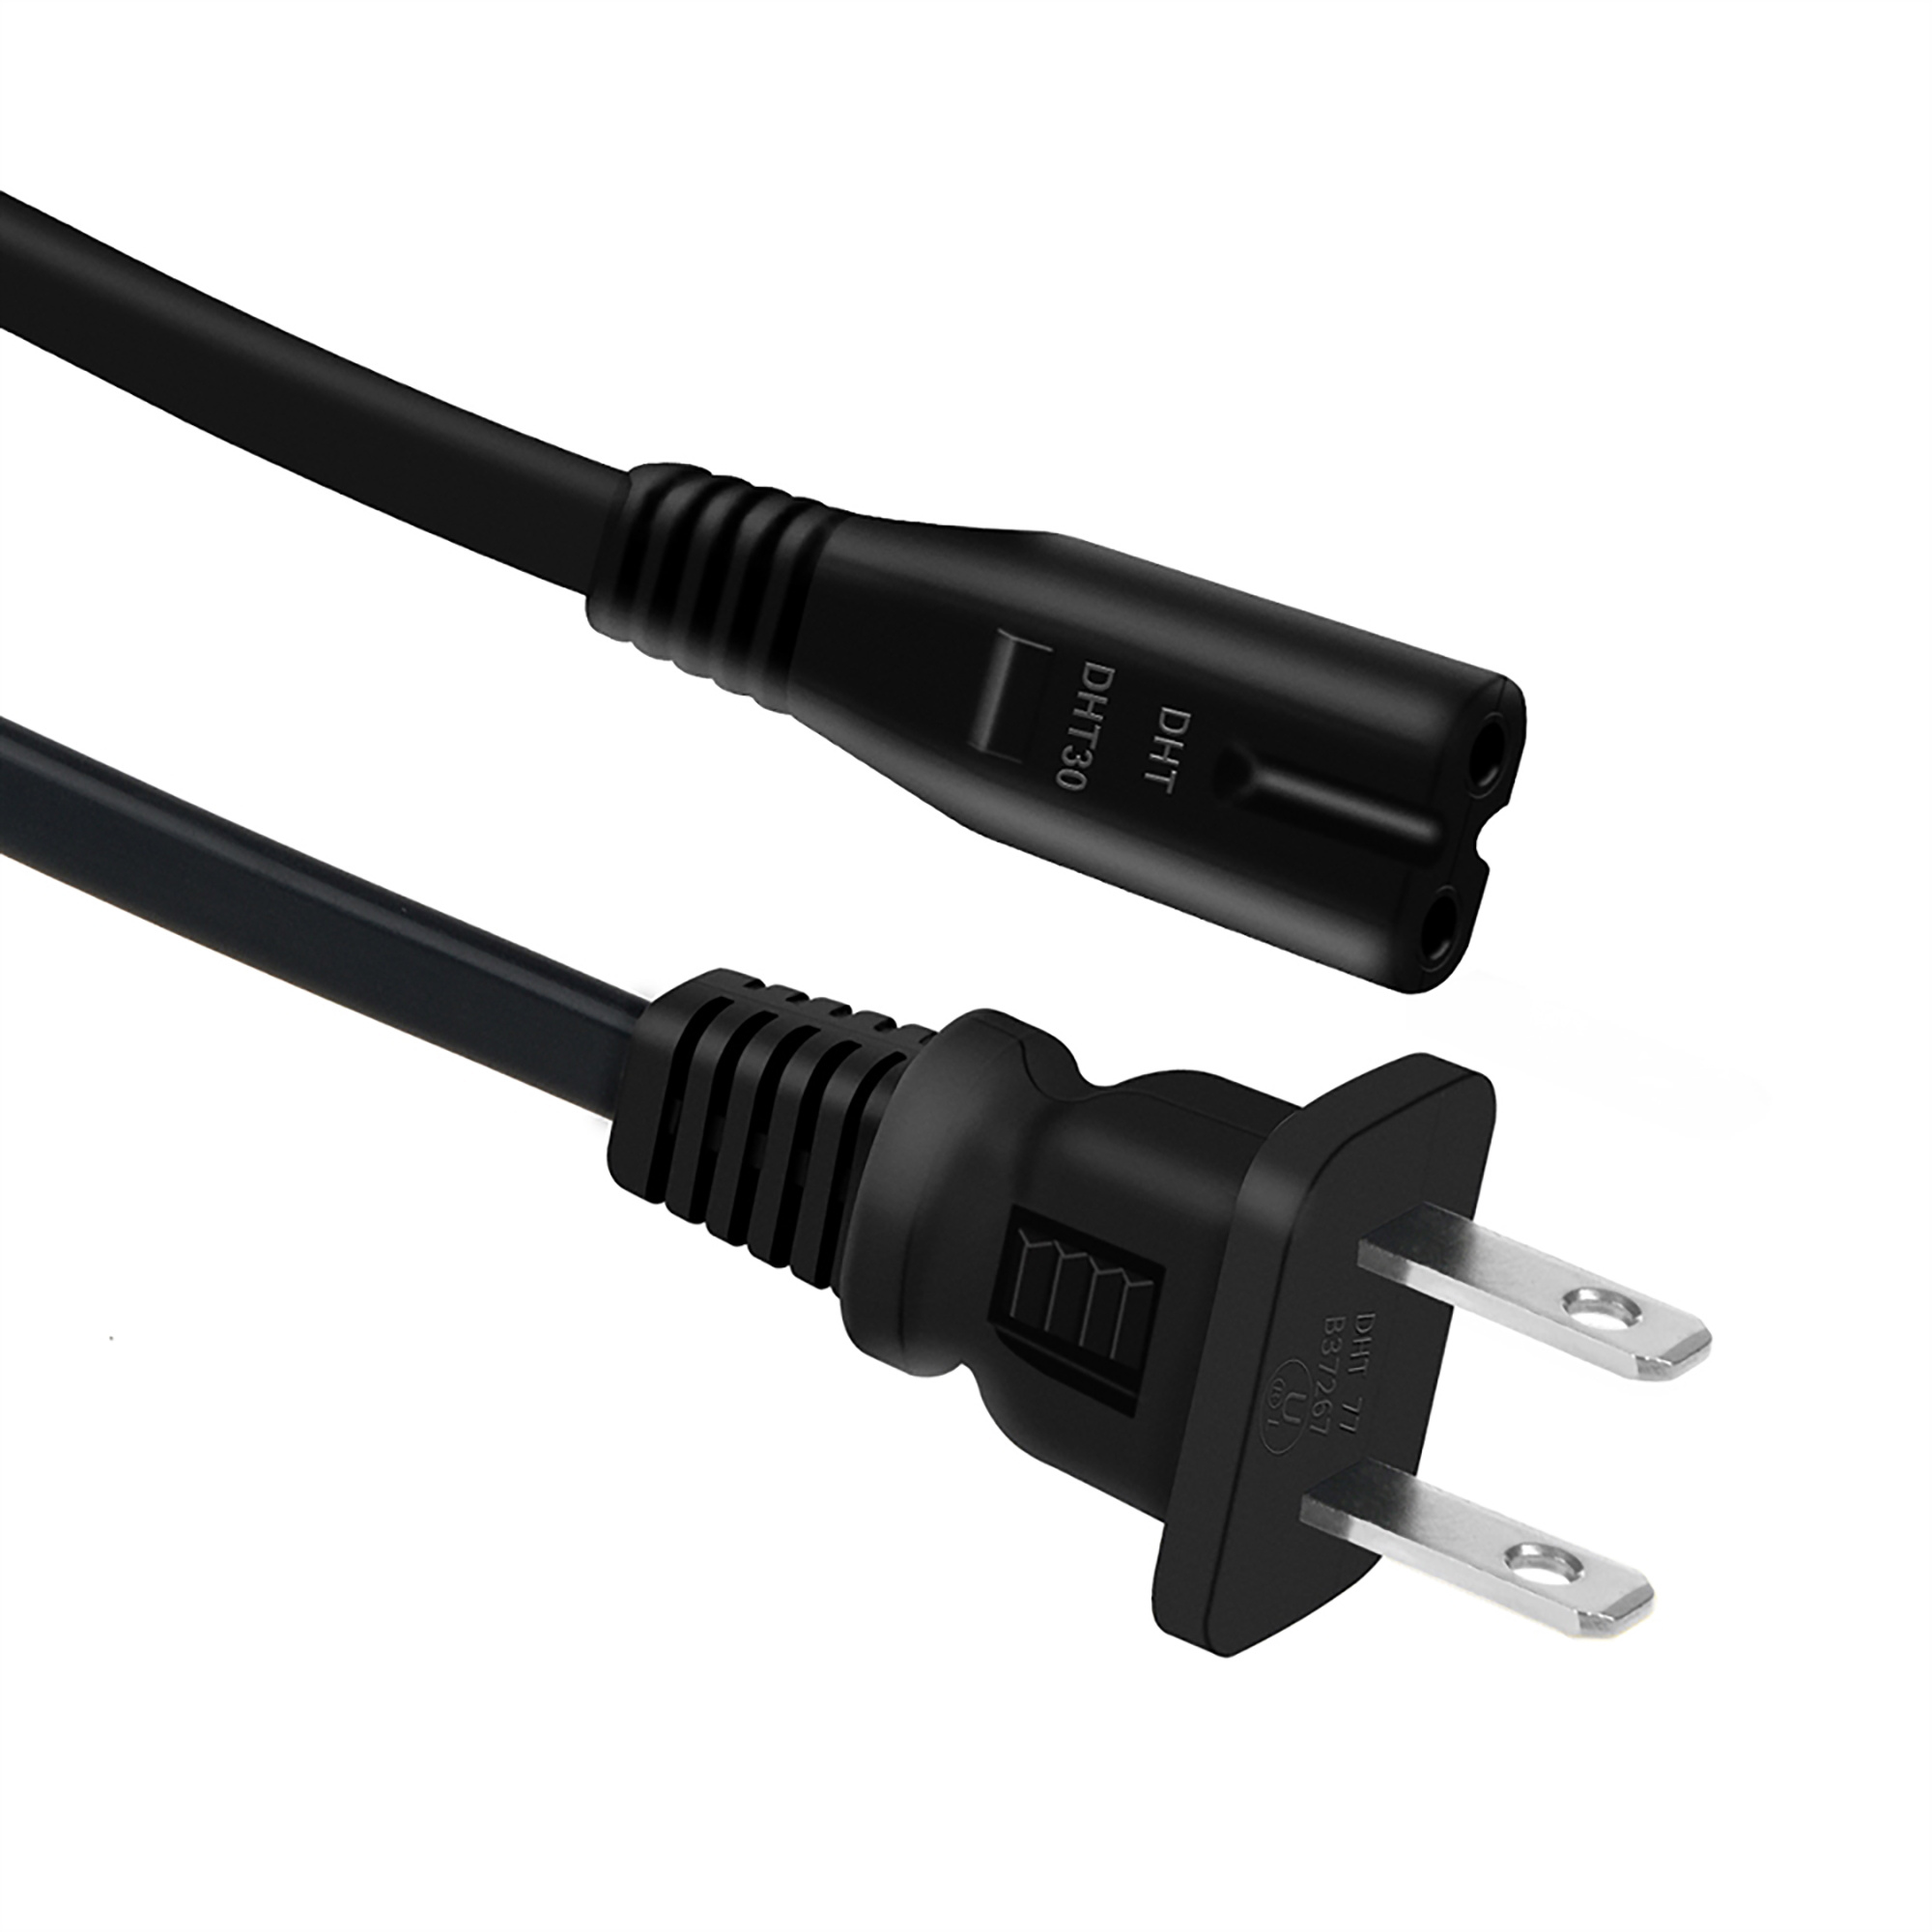 PKPOWER AC Power Cord for Monster BTW249 40W High Performance In/Outdoor Speaker - image 3 of 3